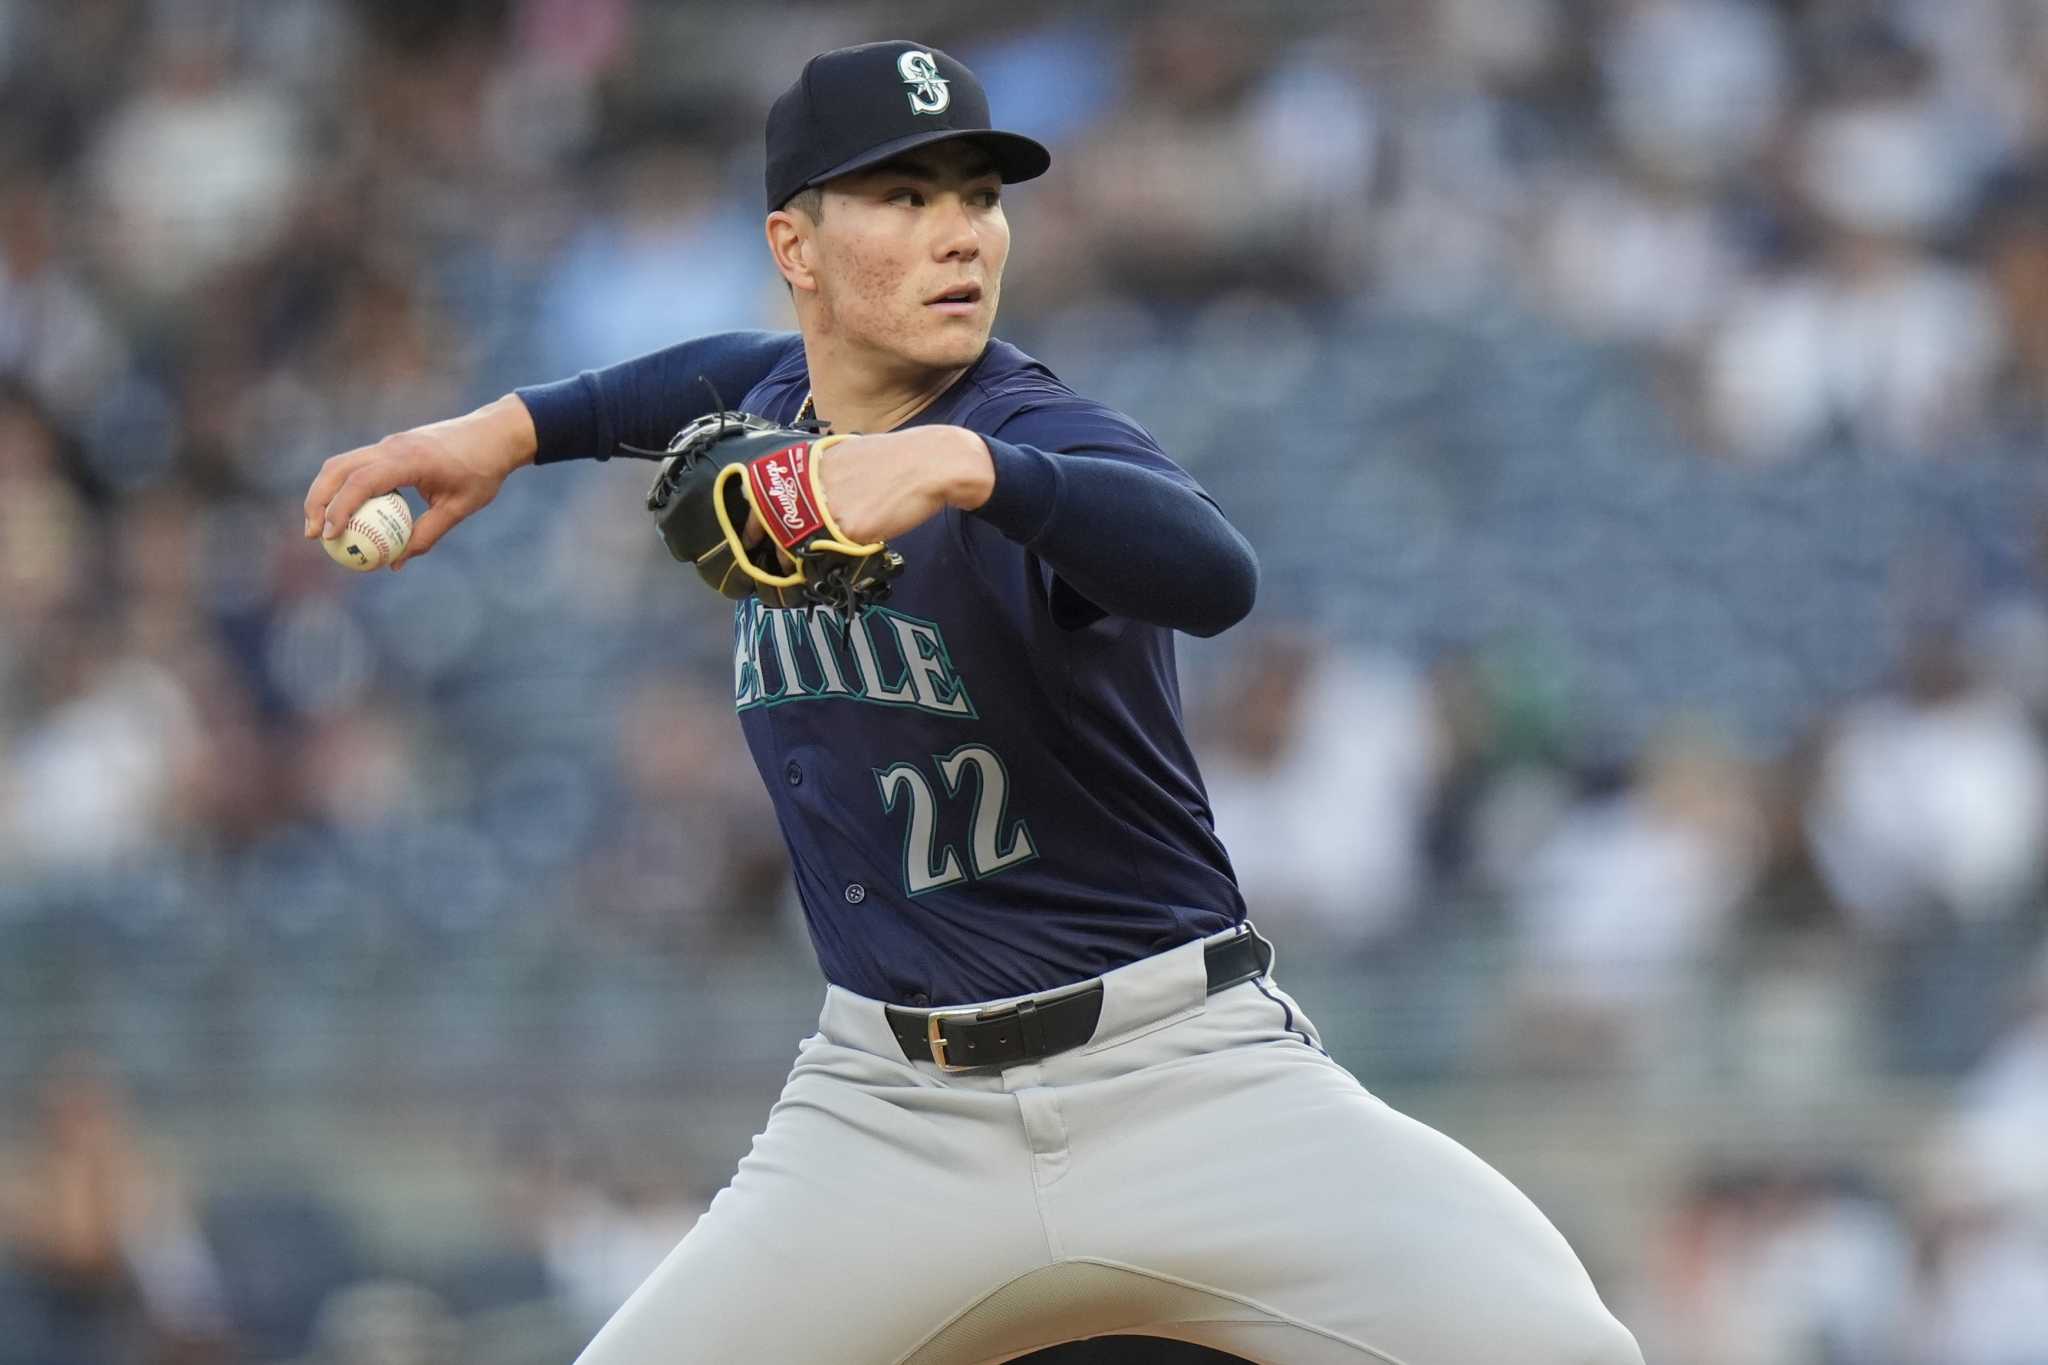 Woo pitches shutout ball for 6 innings, Moore has 2 homers and 4 RBIs as Mariners beat Yankees 6-3